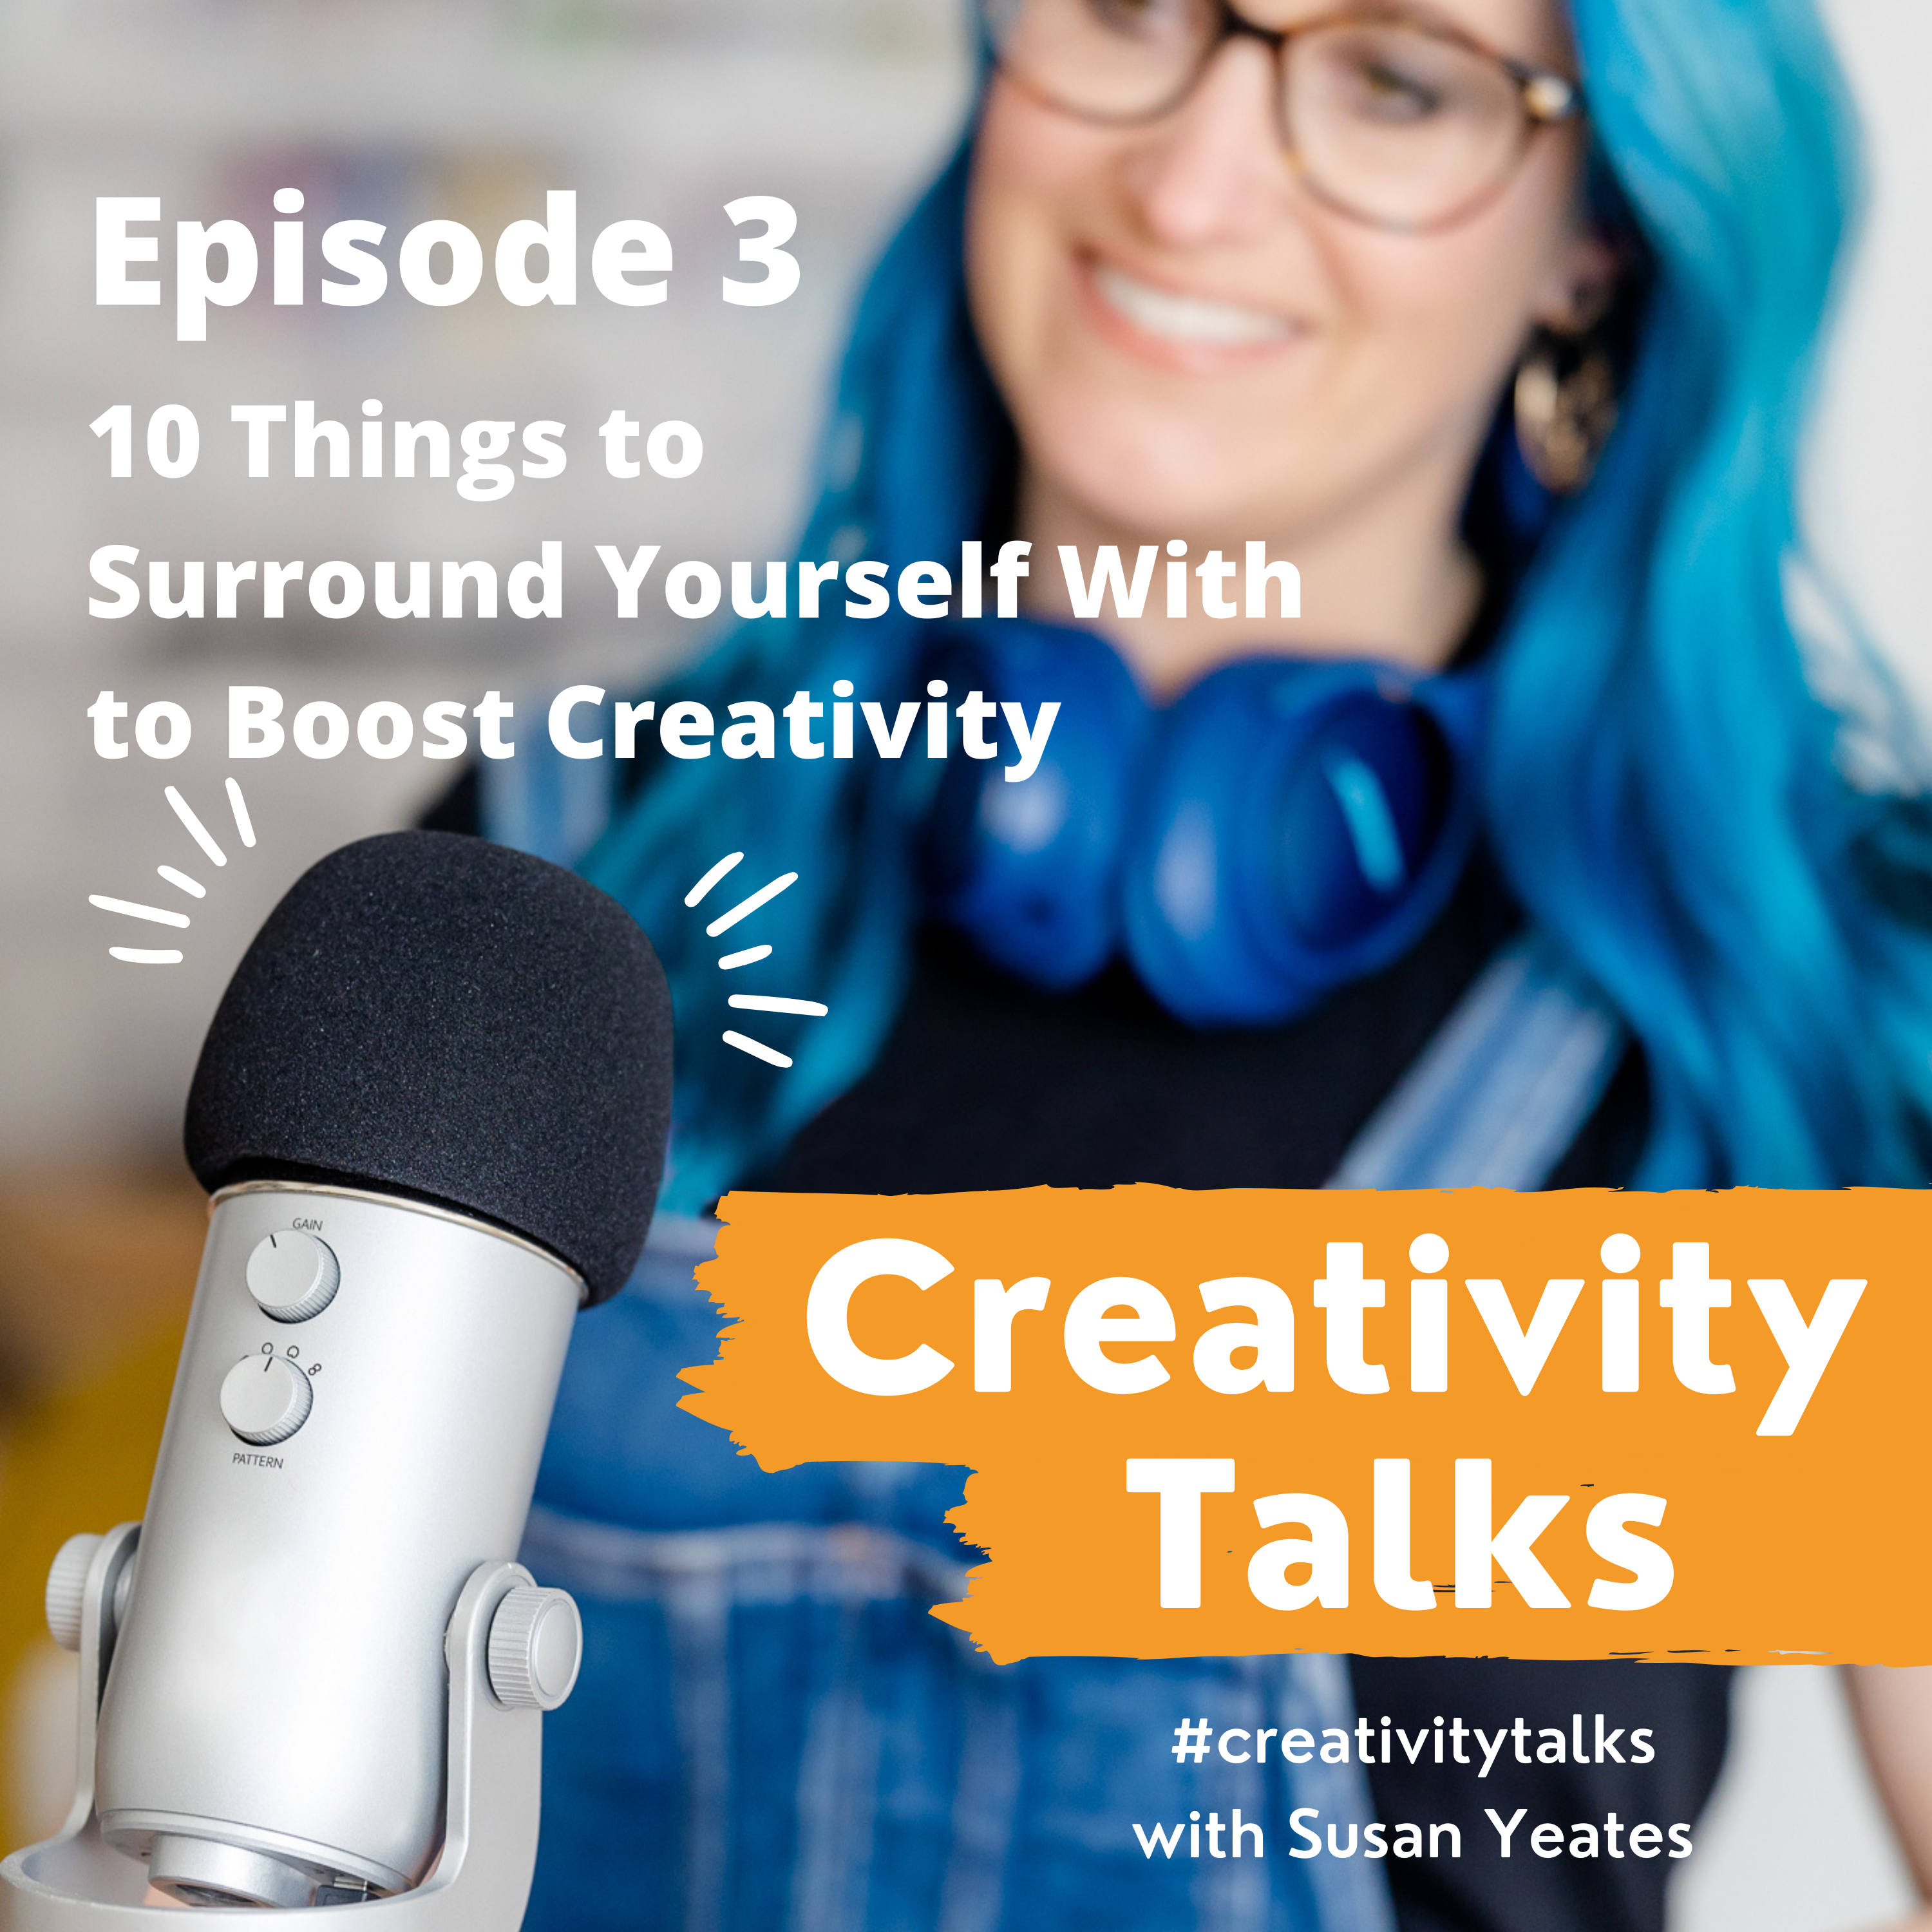 Creativity Talks 3: 10 Things to Surround Yourself with to Boost Creativity